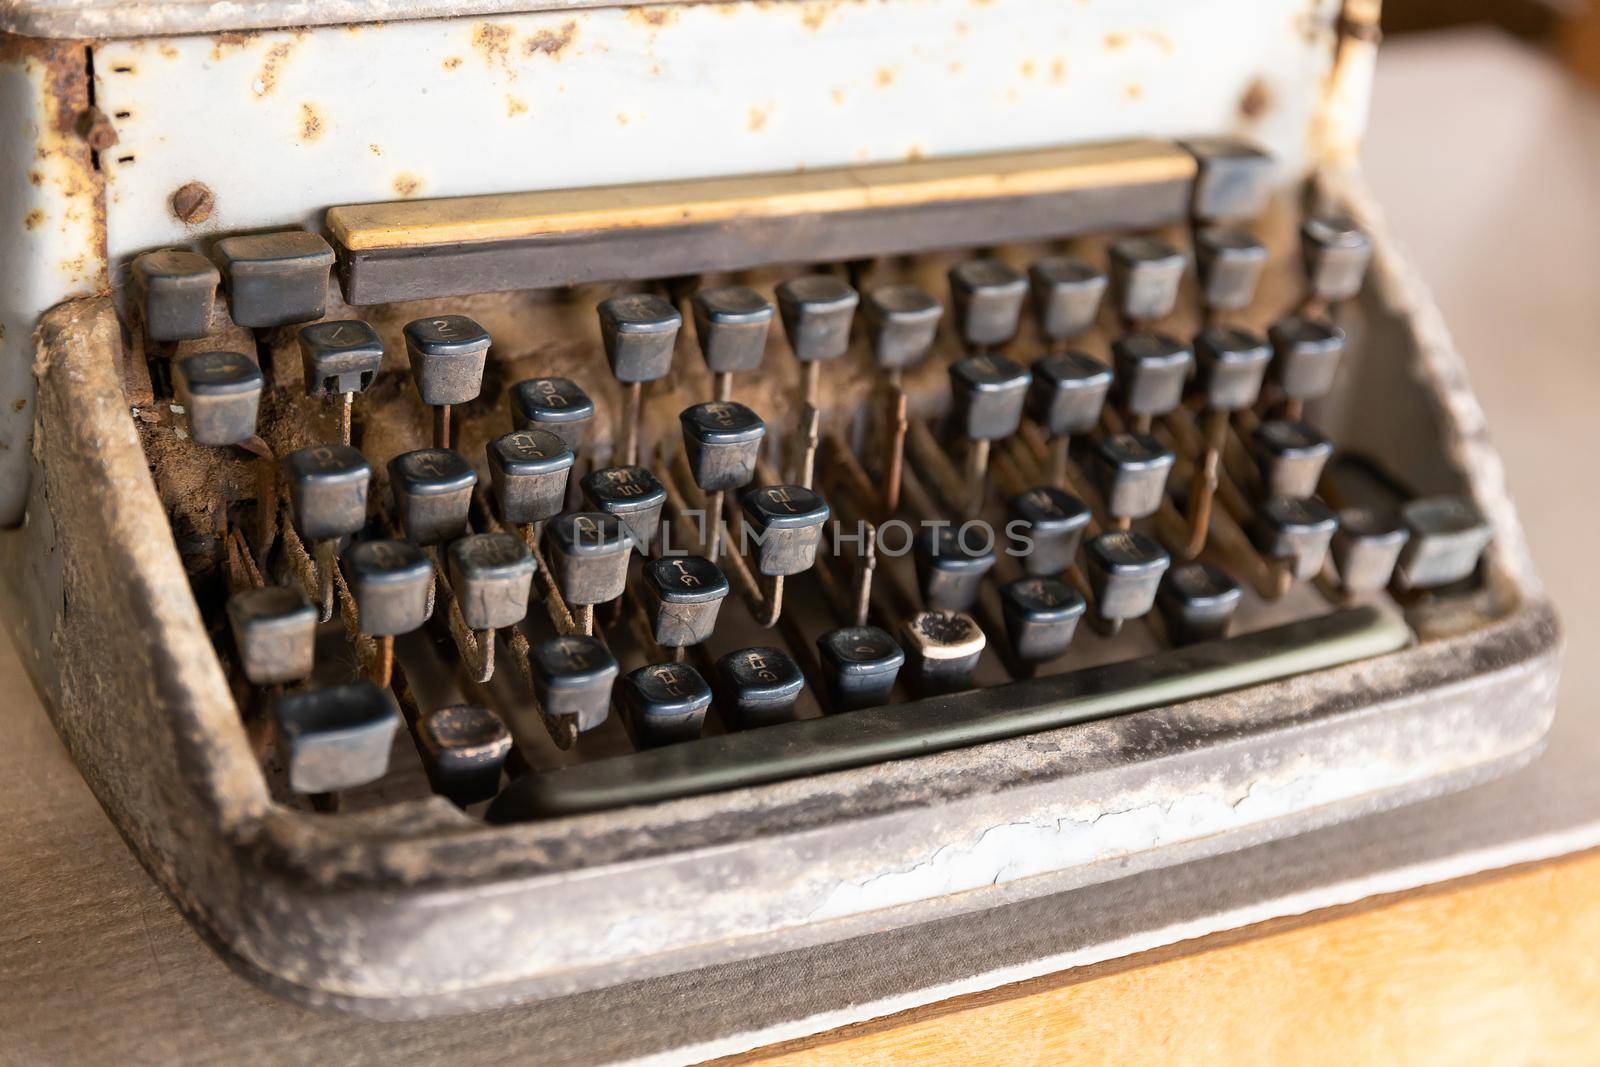 Old and rusty type writer by smuay